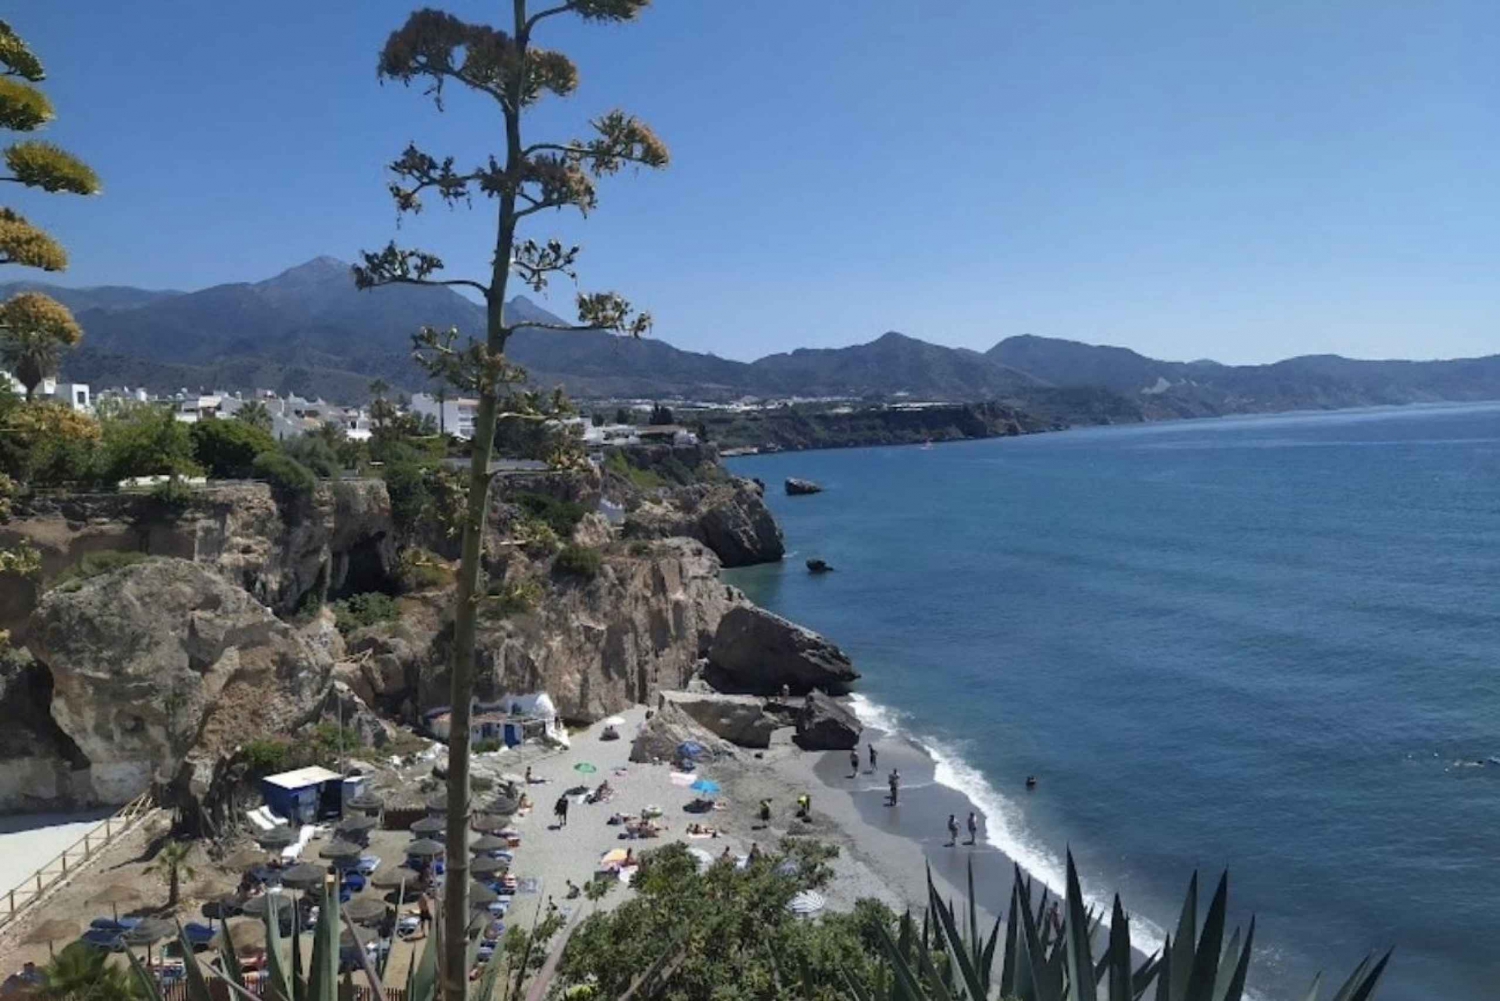 From Malaga: White town of Frigiliana, Nerja and caves